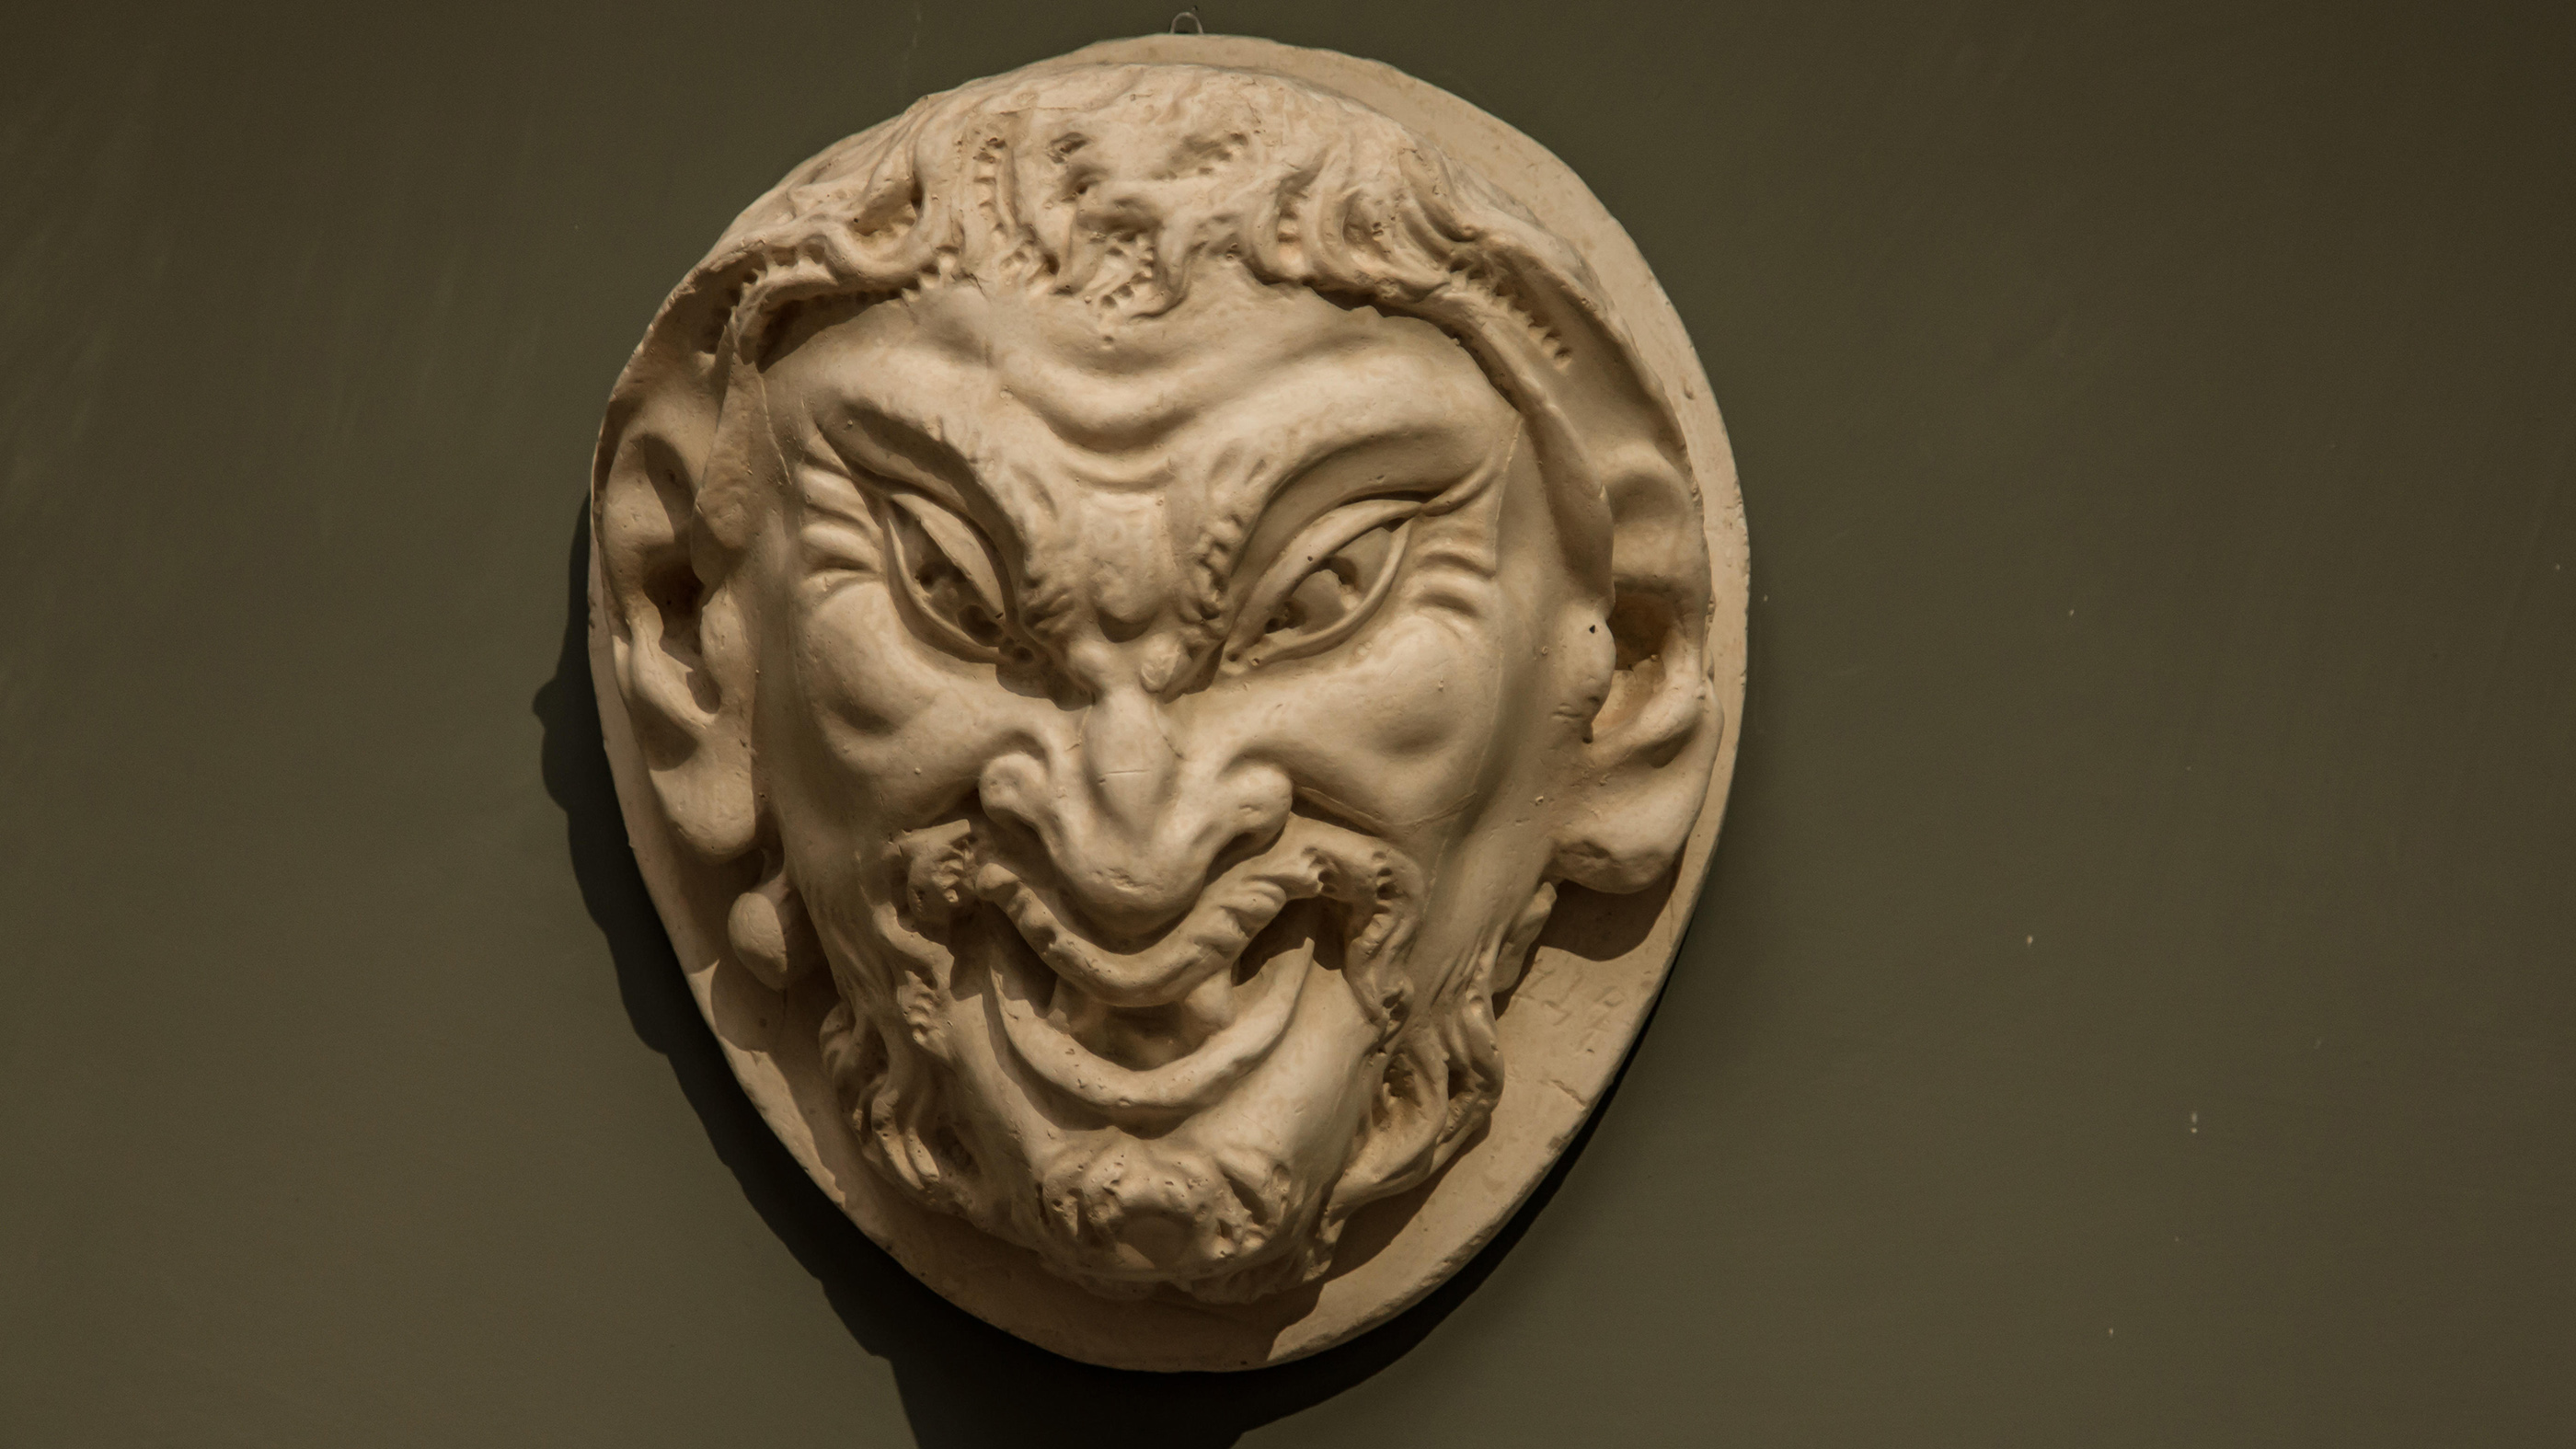 The mask of a faun by Michelangelo.